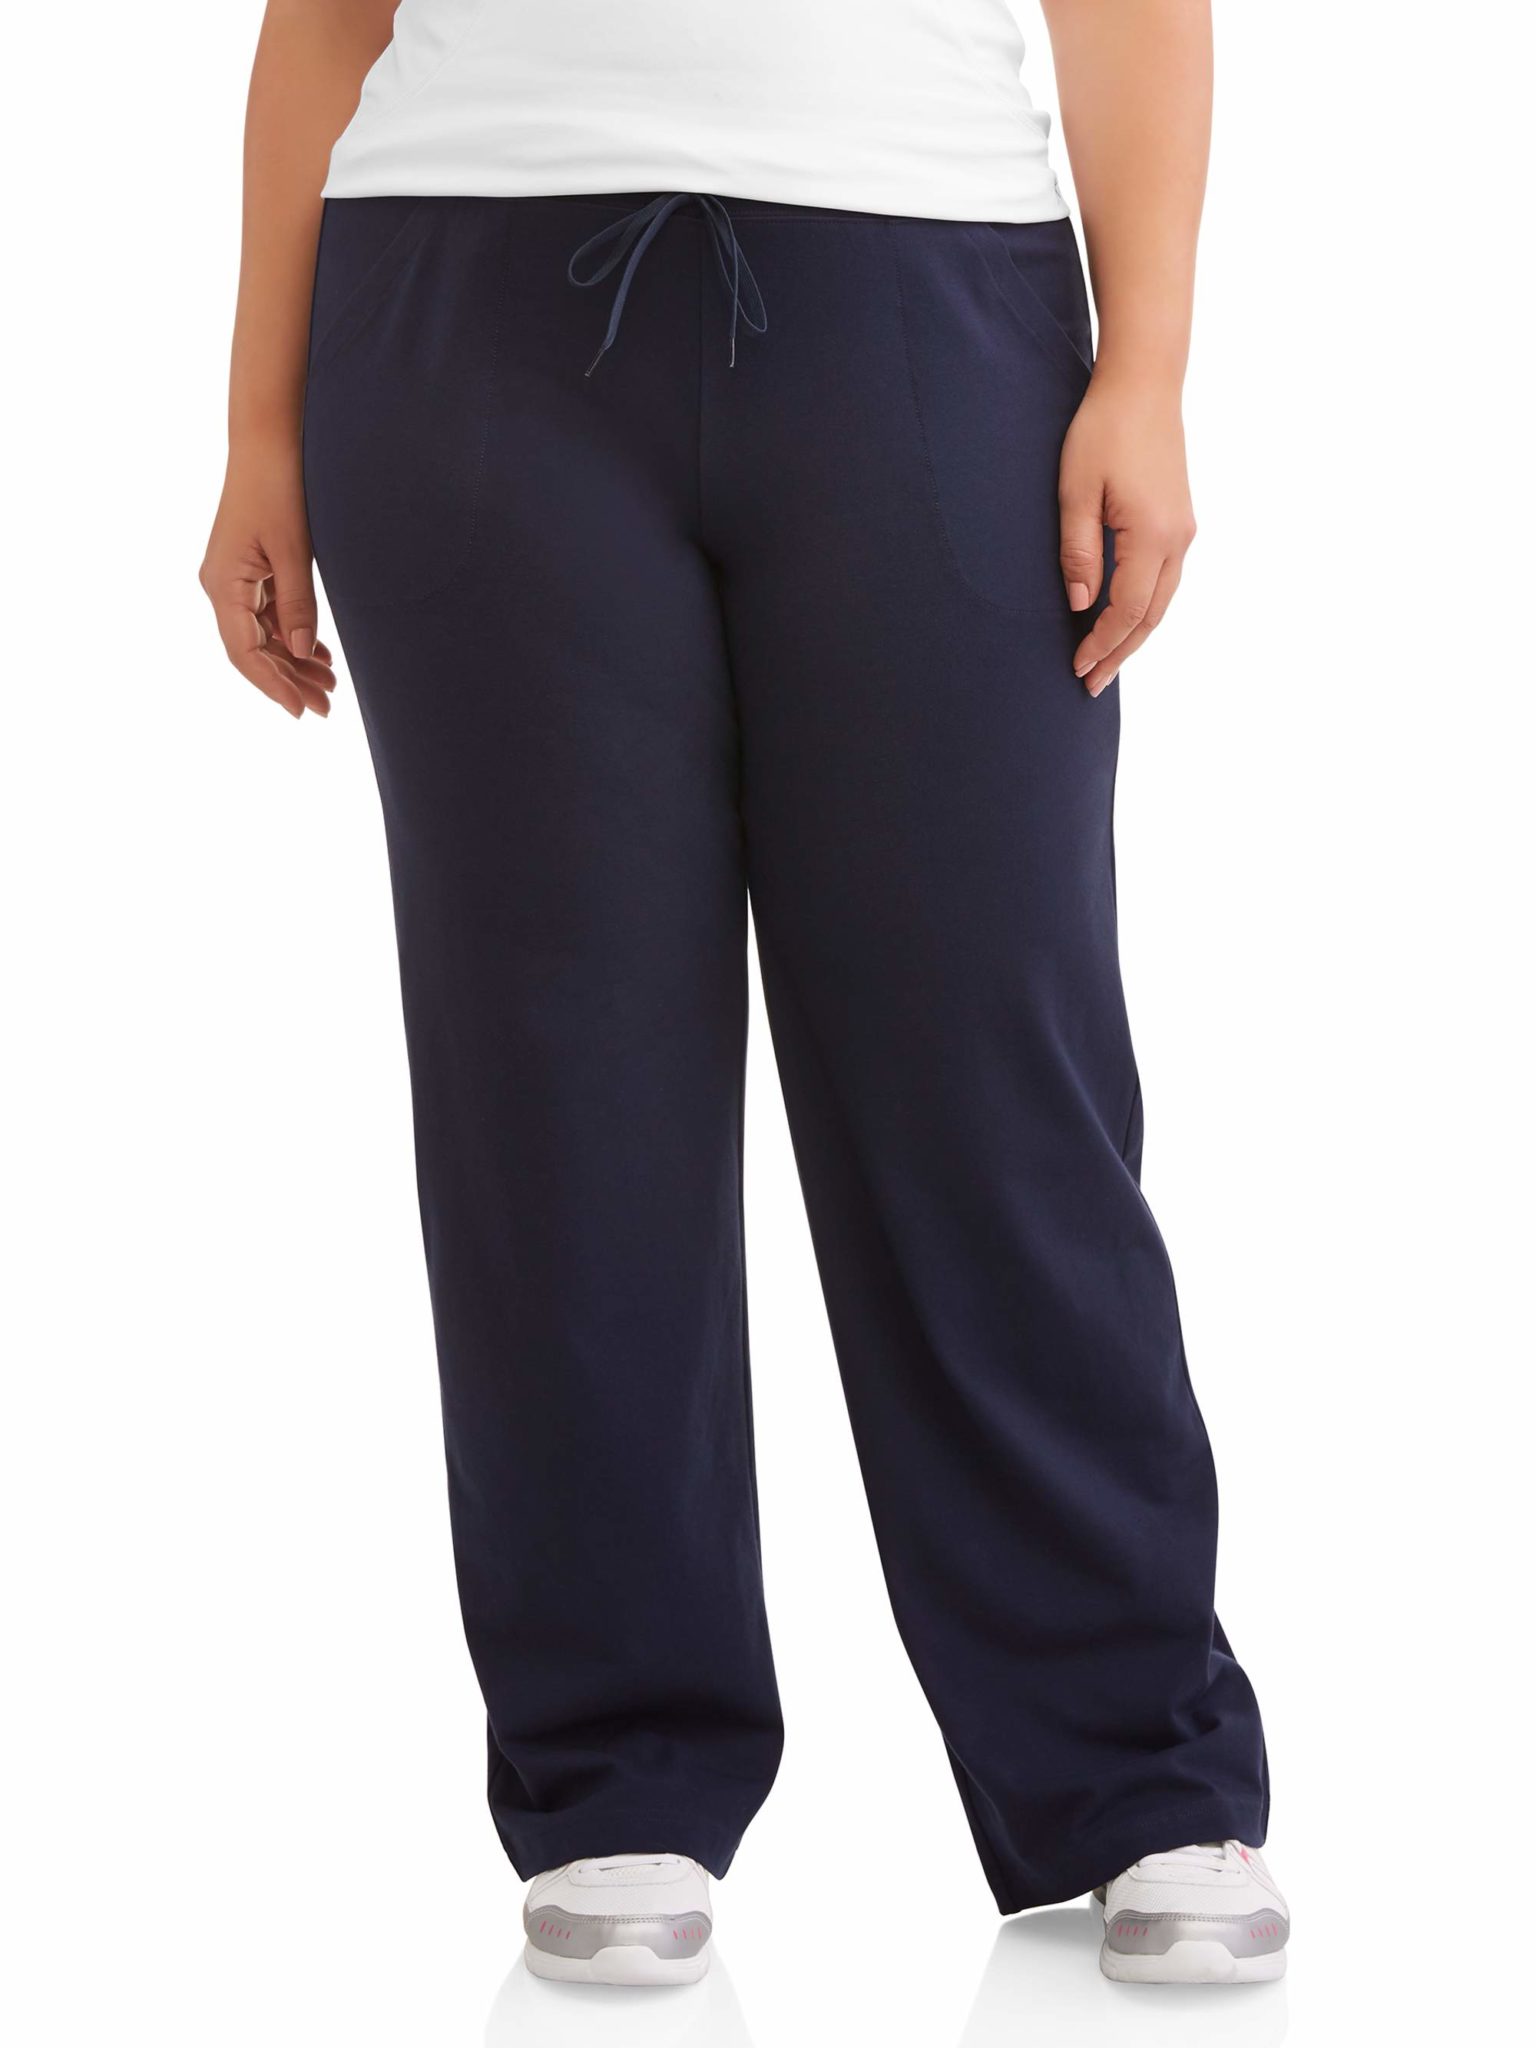 Athletic Work's Women's Plus Size Dri More Plus Relaxed Pants ...